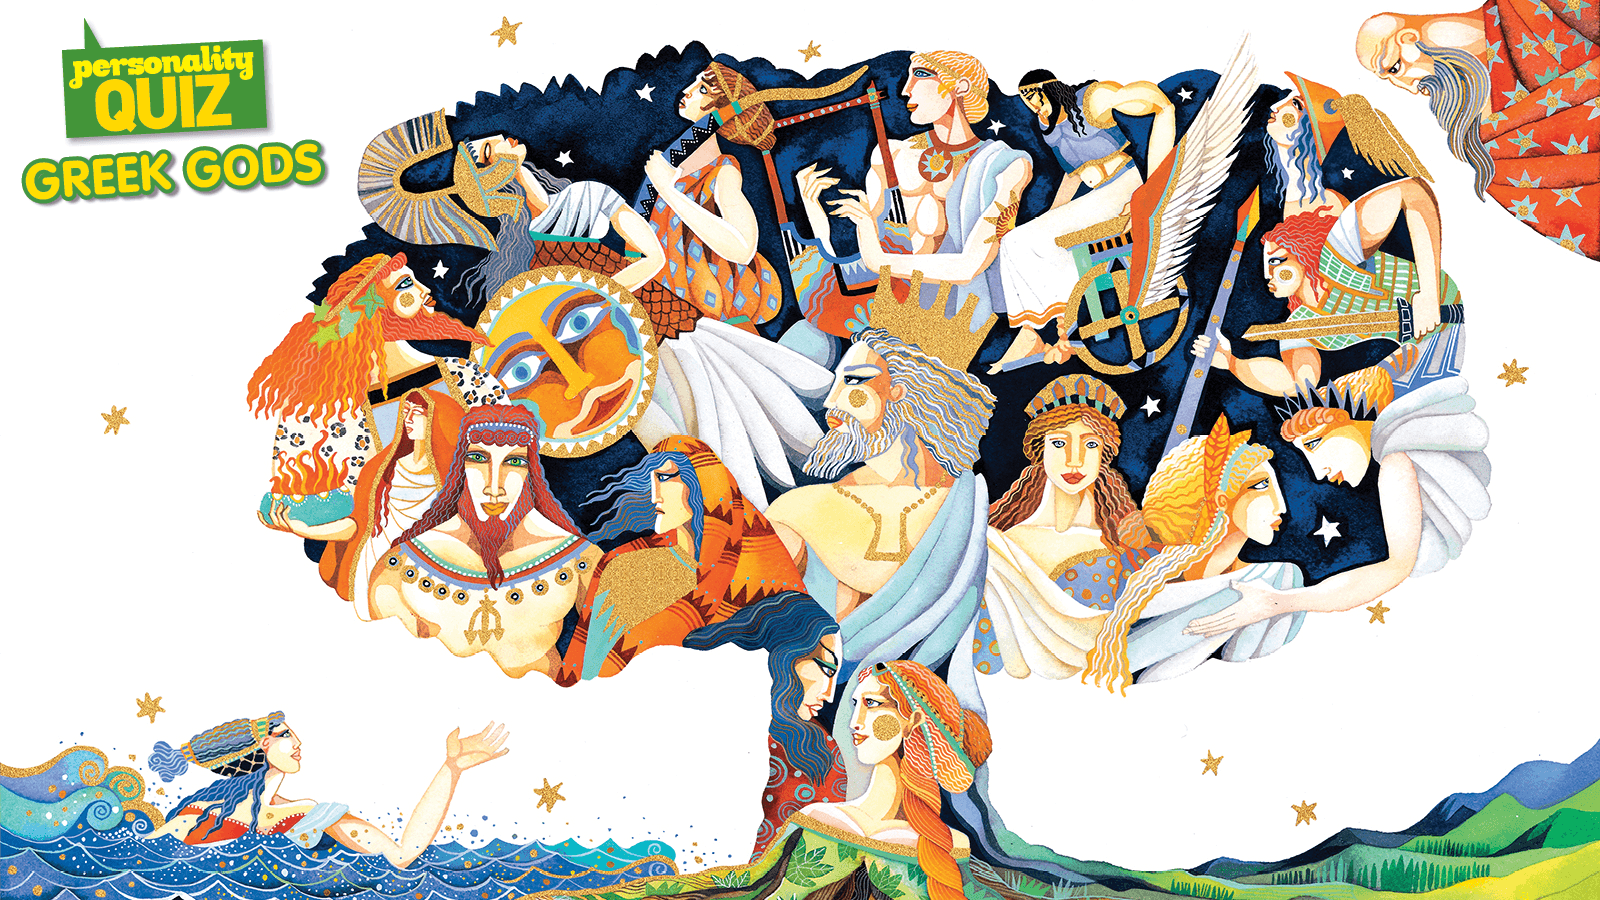 Greek gods and goddesses by T